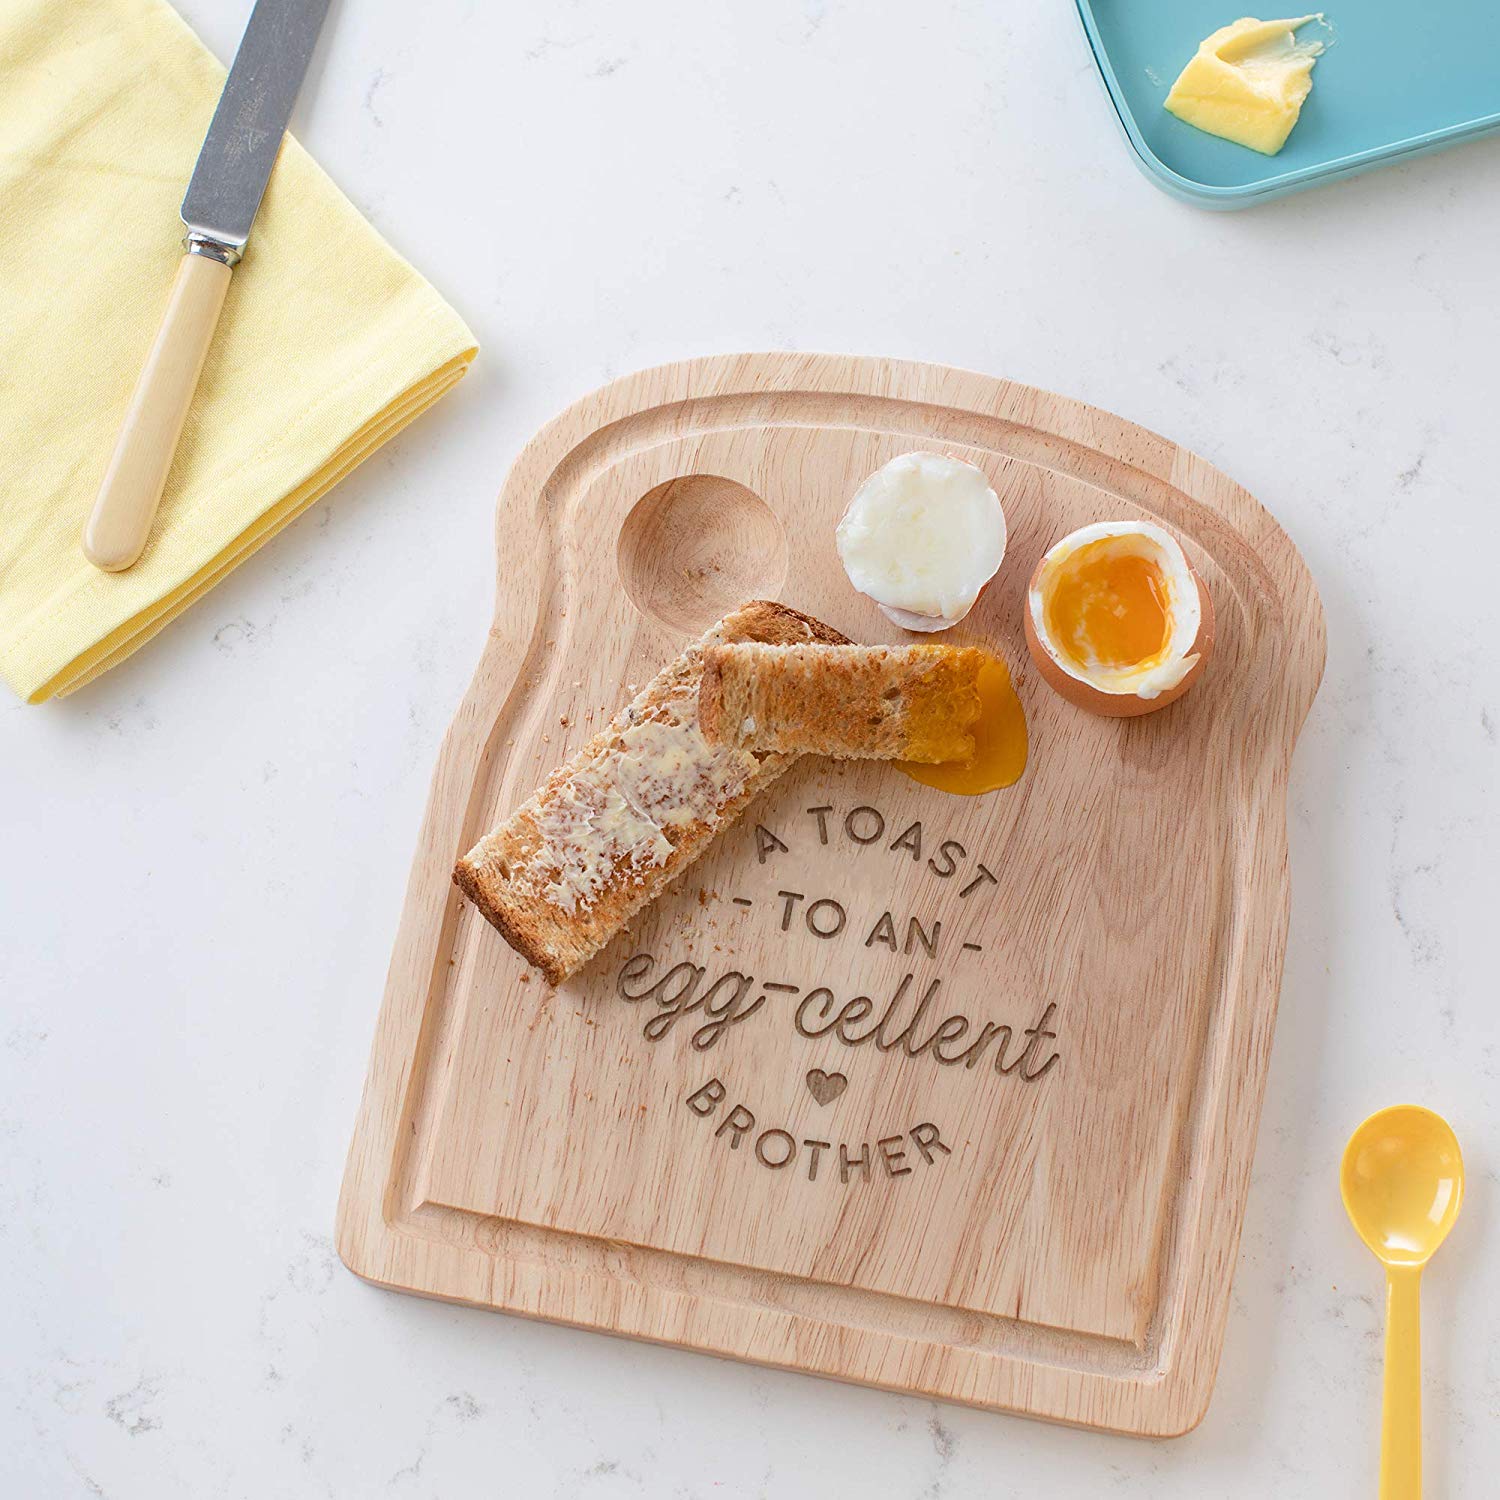 A Toast to an Egg-cellent Brother Breakfast Egg Board